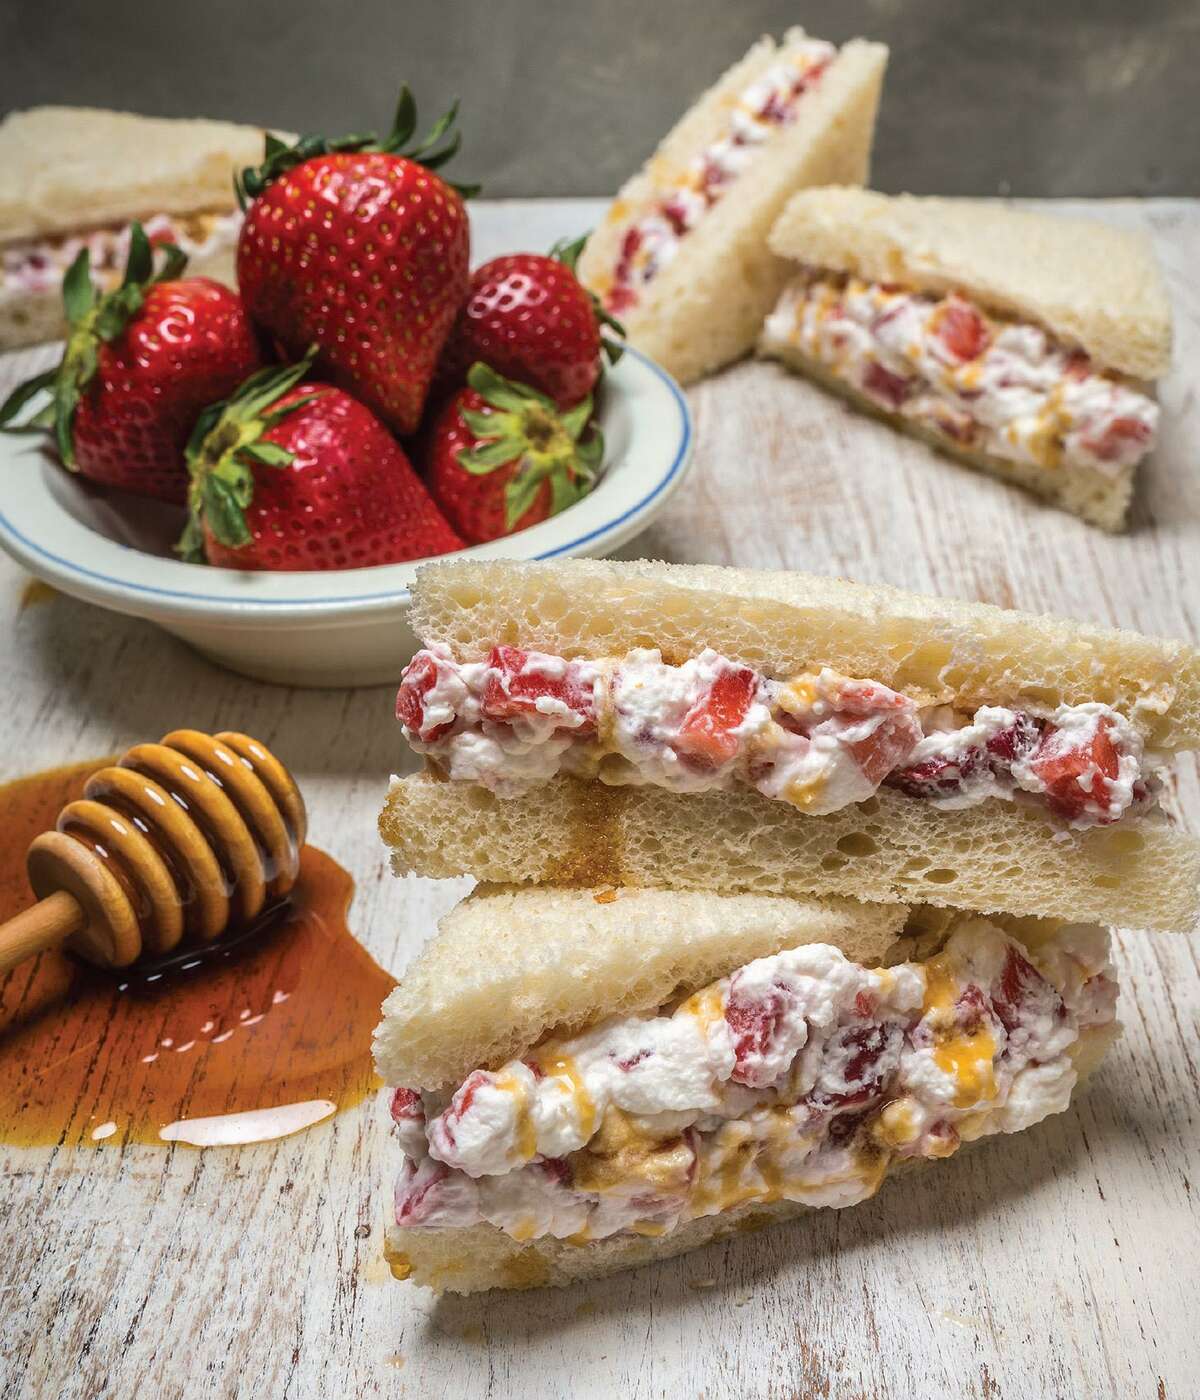 Strawberry Sandwiches from "Bring It!" by Ali Rosen.